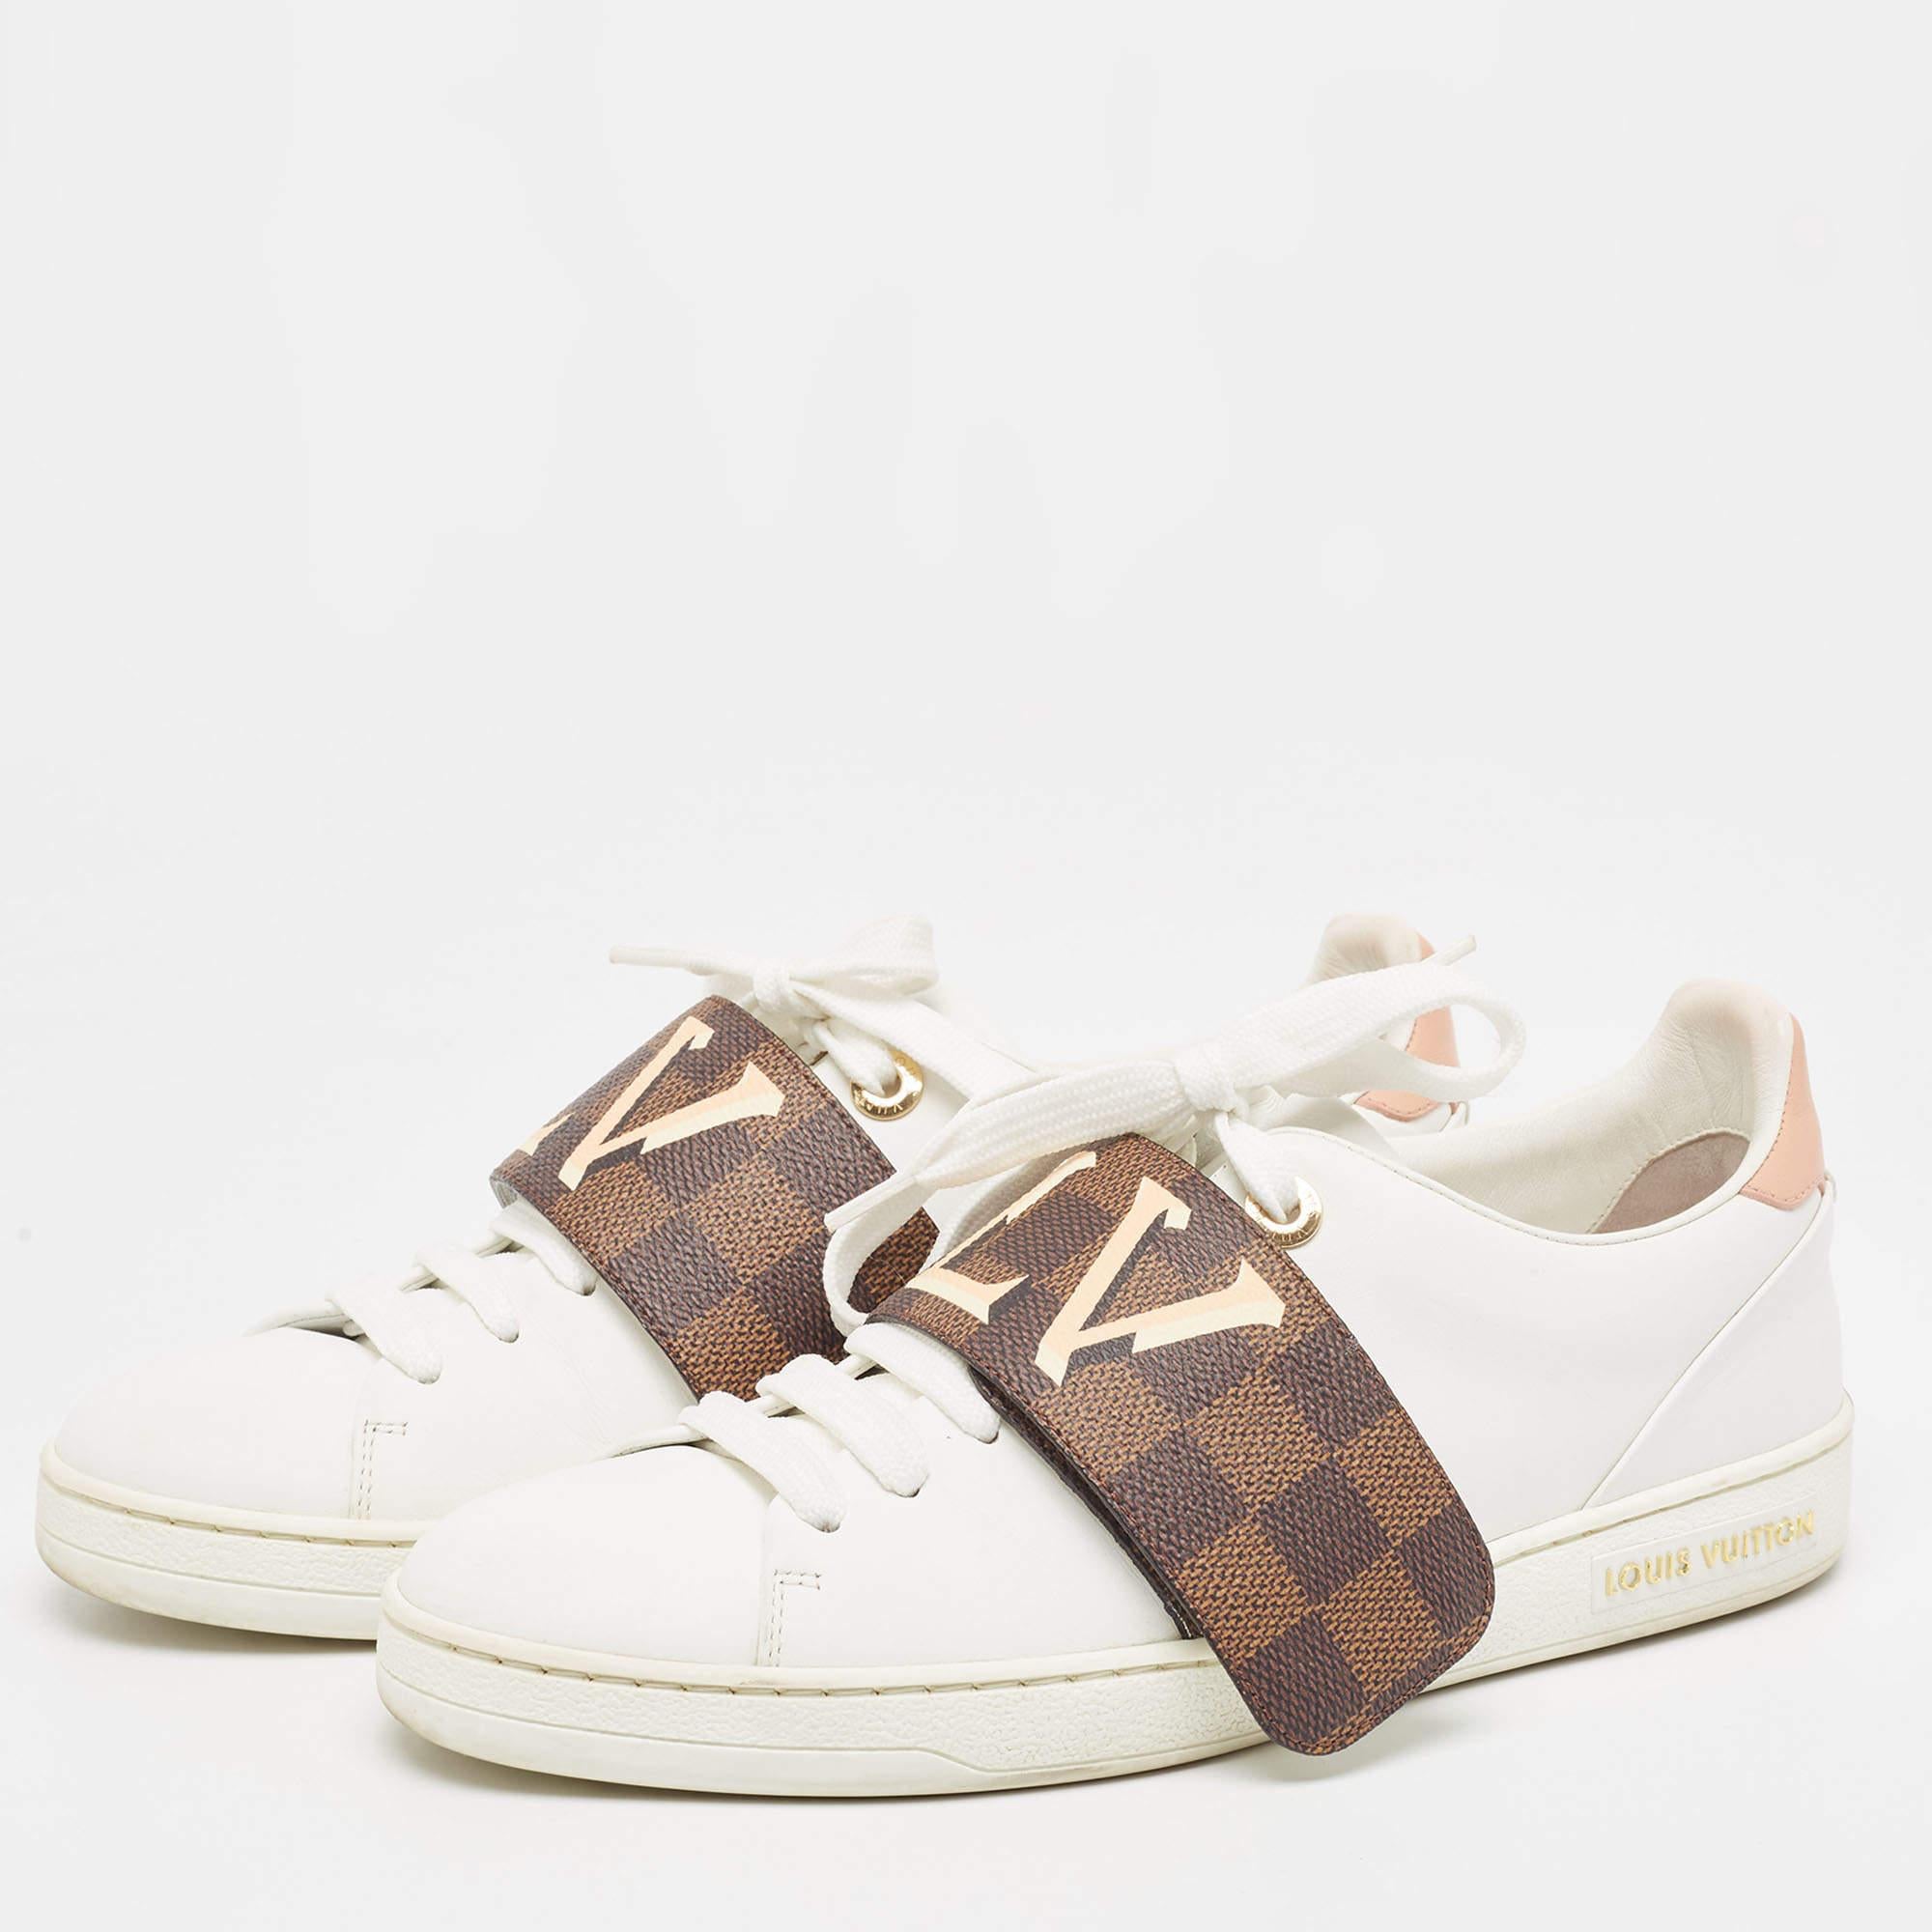 Women's or Men's Louis Vuitton White Leather and Monogram Canvas Frontrow Sneakers Size 37.5